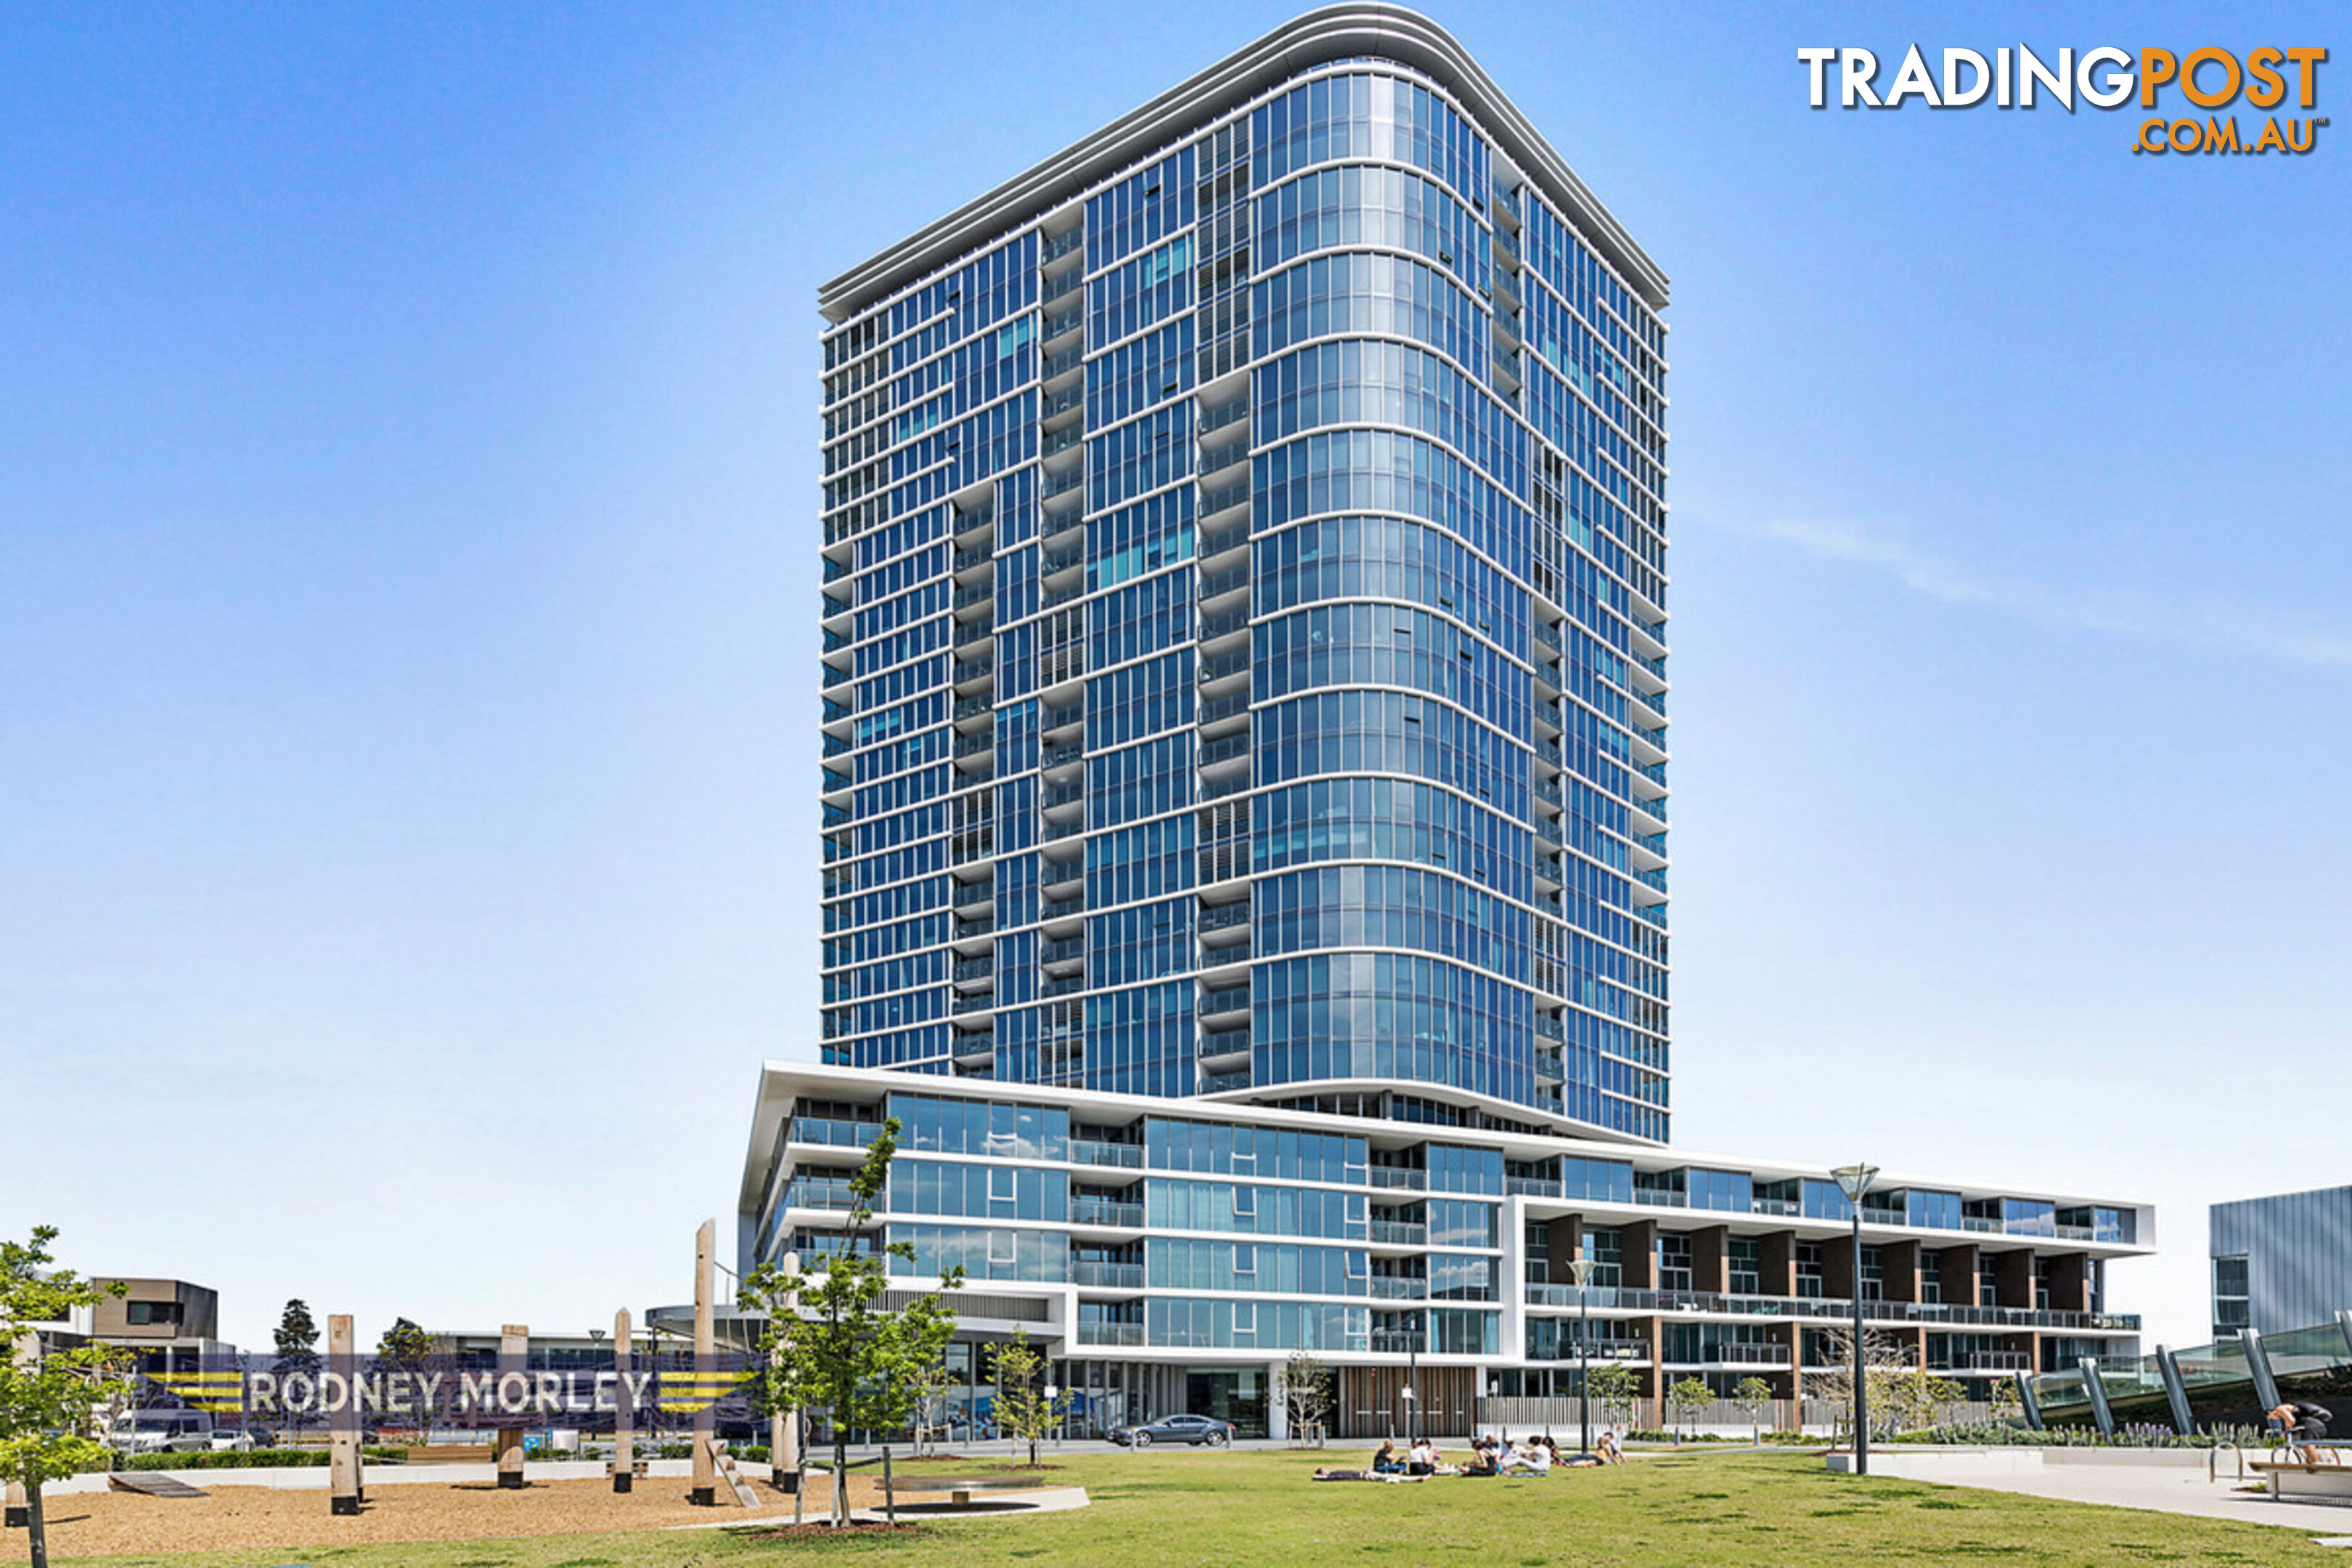 2101 81 South Wharf Drive Docklands VIC 3008